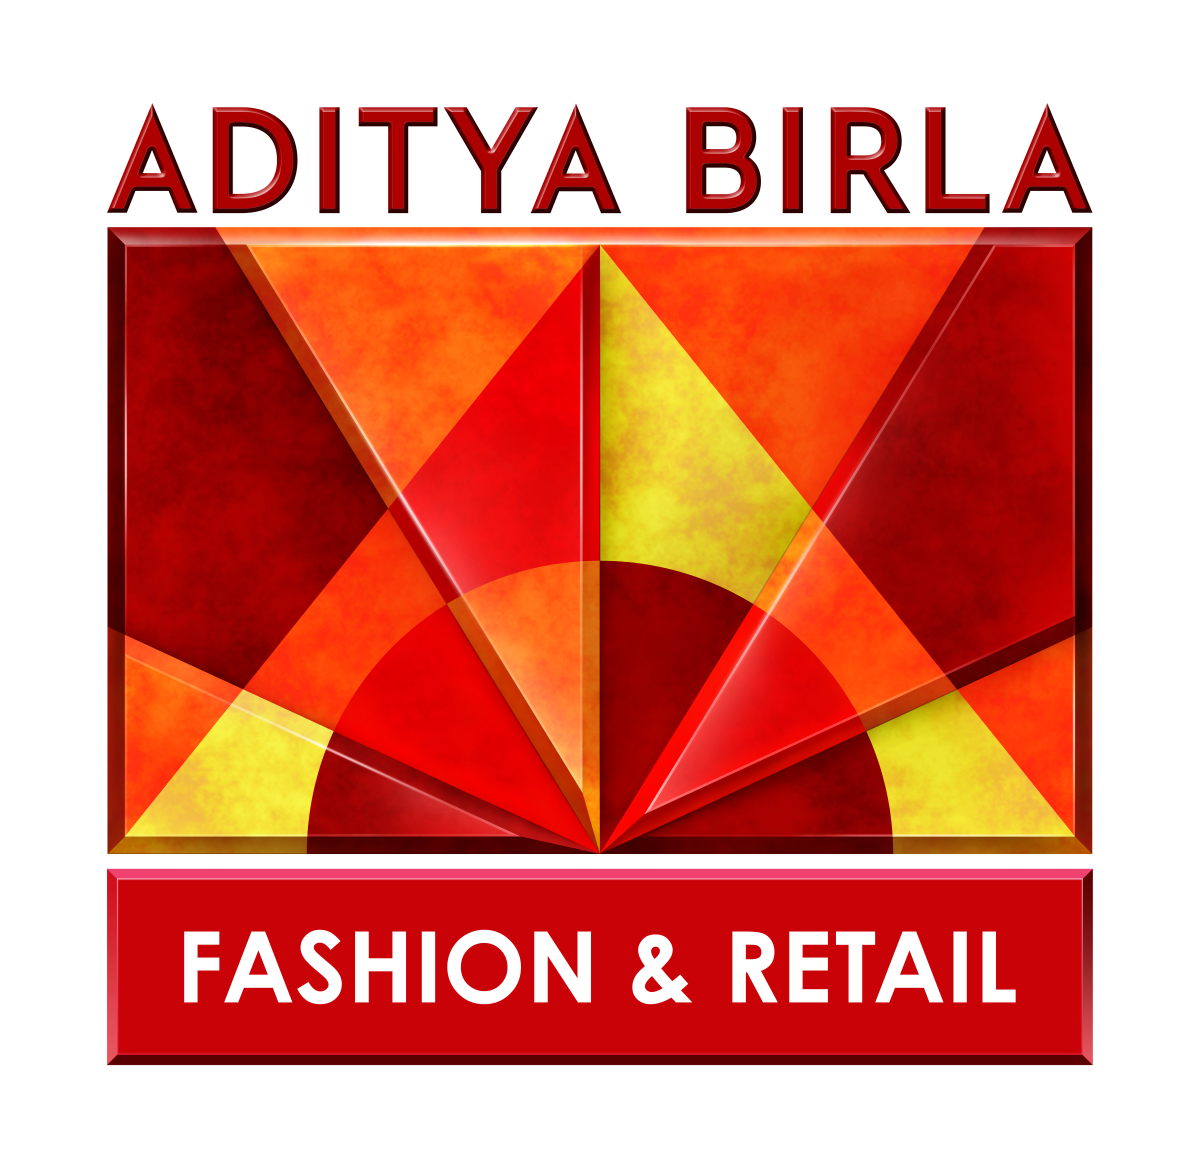 Aditya Birla Fashion and Retail collaborates with Germany's GIZ to boost circular business practices